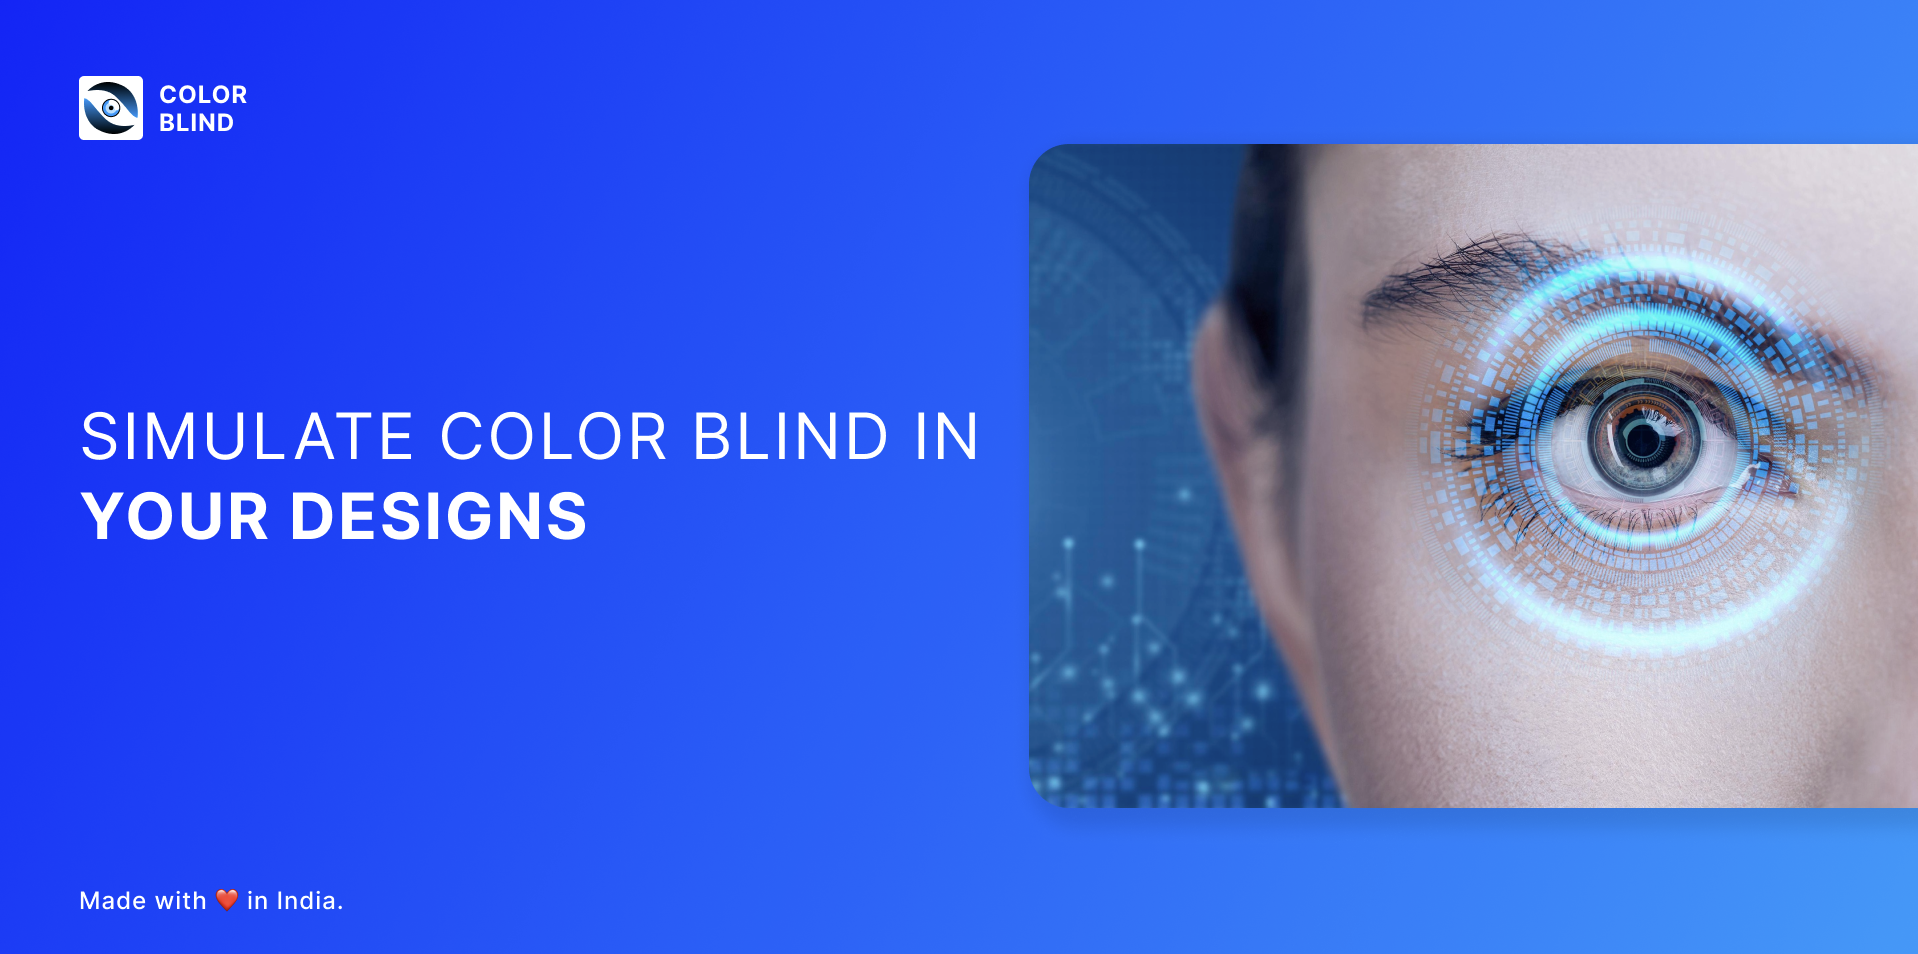 Screenpage for the Color Blind app with the text "Simulate Color Blind in Your Designs" with a close-up realistic portrait of a white women with one eye and eyebrow showing with circular imagery overtop their hazel eye. Text in the corner "Made with love in India"